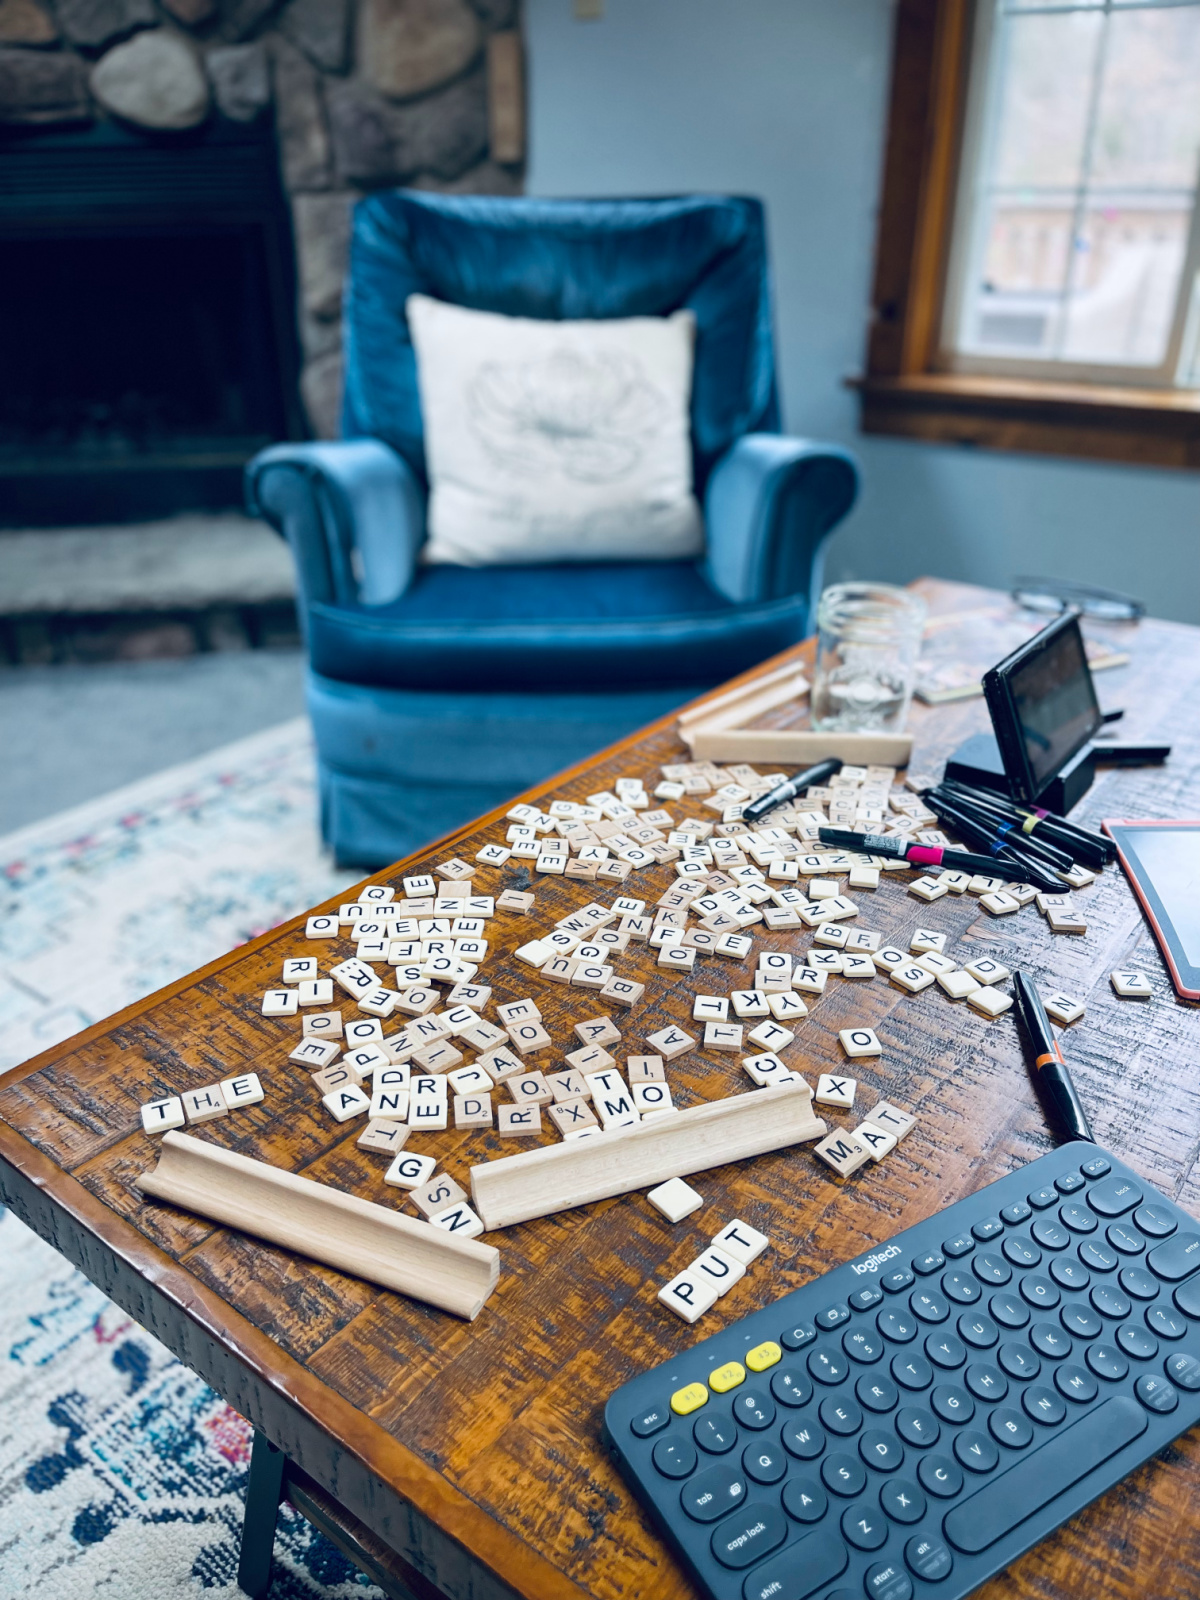 scrabble and bananagrams tiles strewn on coffee table.